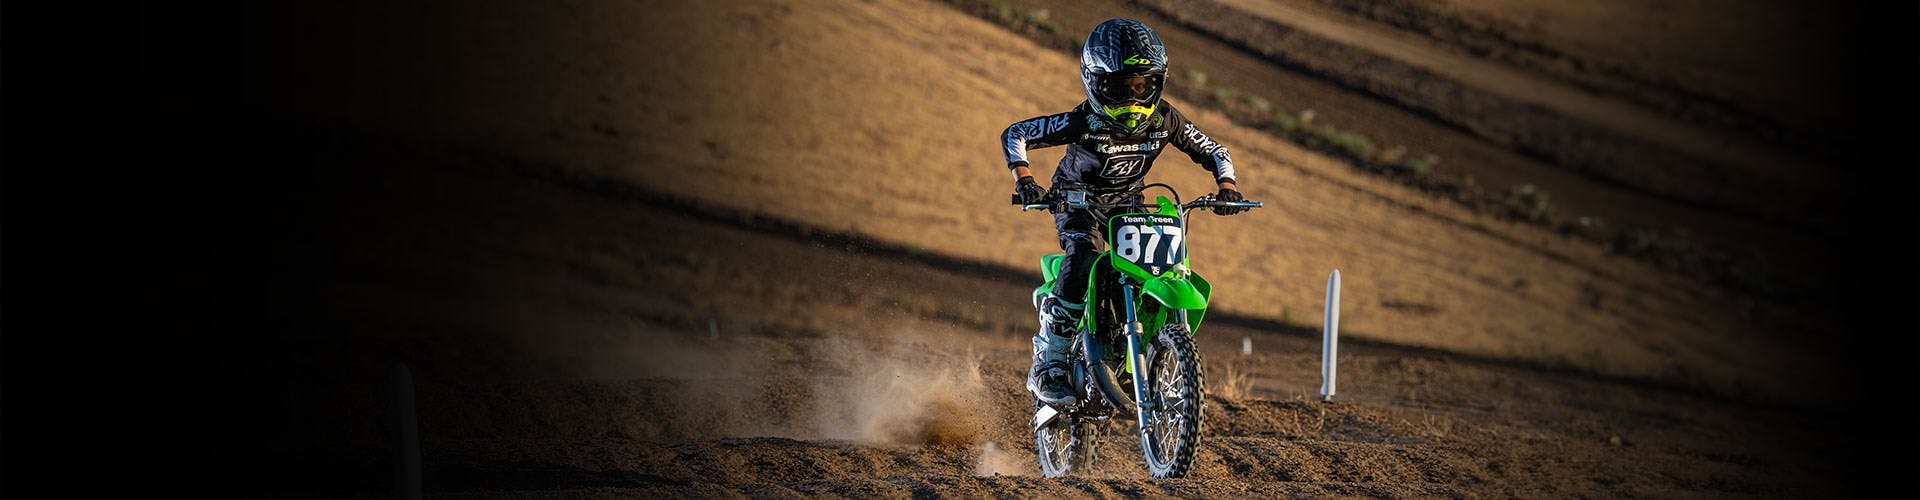 Kawasaki KX65 in lime green colour, in action on off road track